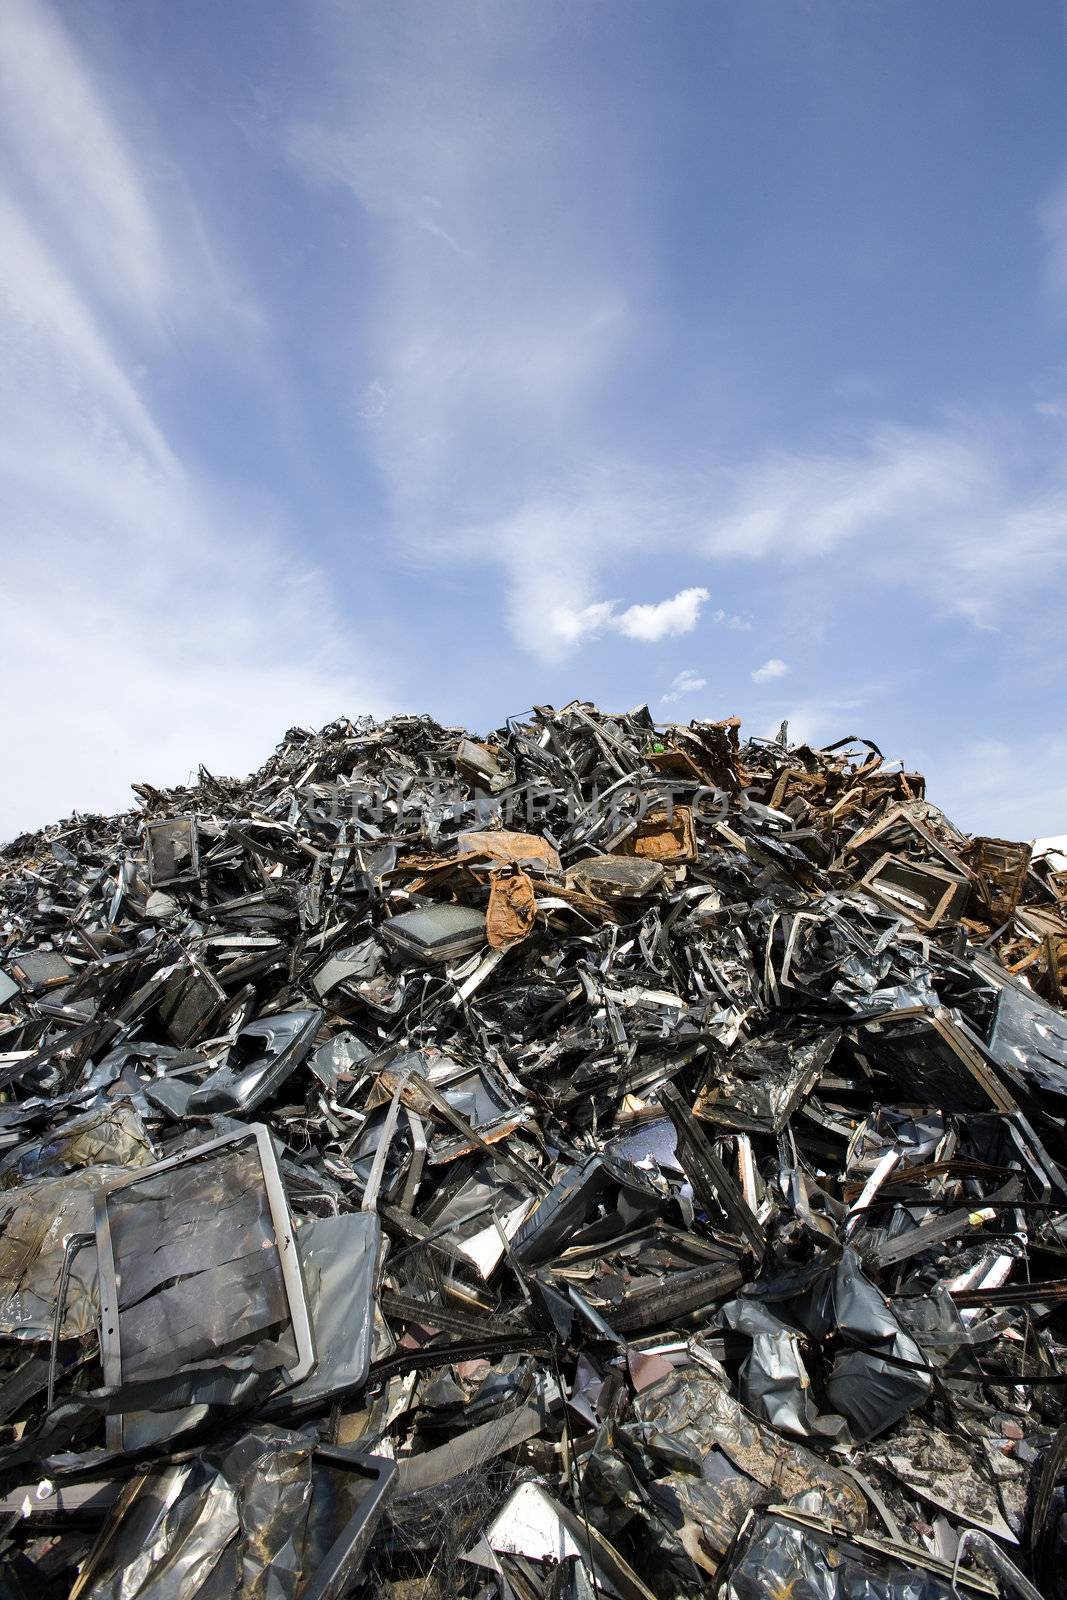 Stack of Metal Garbage in front of blue sky